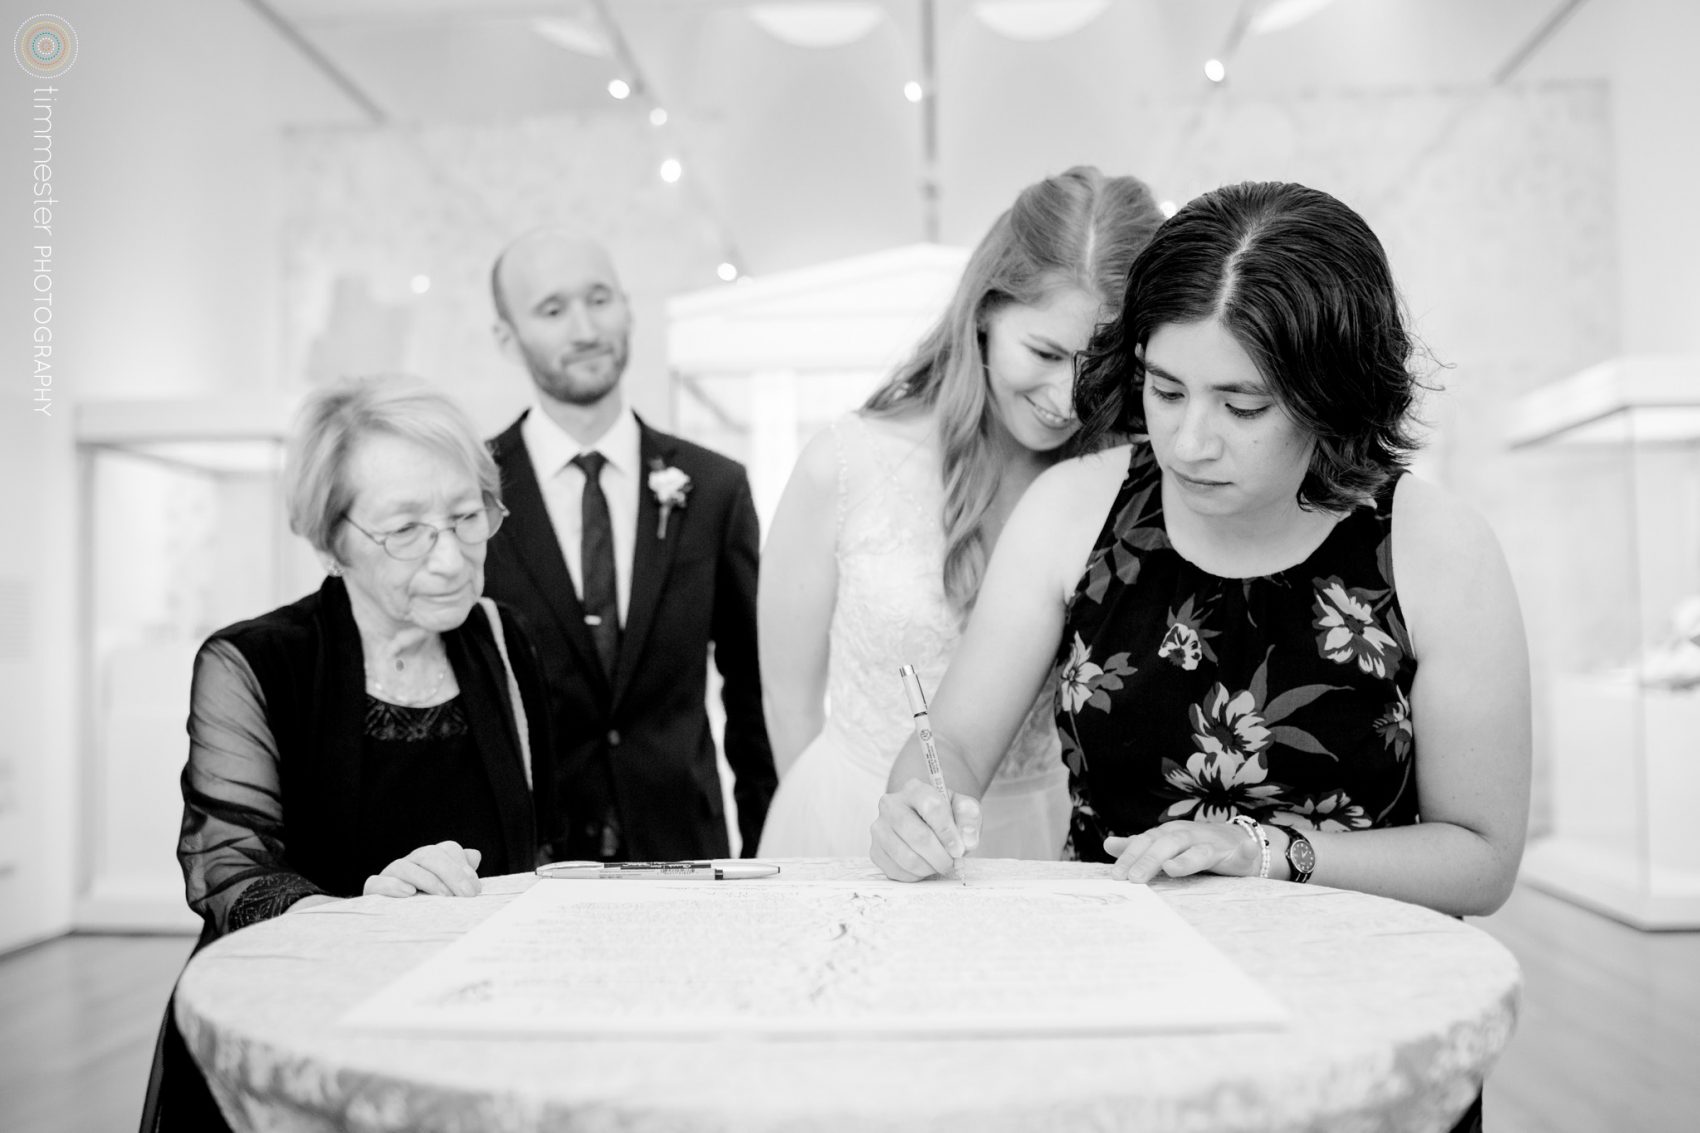 A Ketubah signing within the North Carolina Museum of Art in Raleigh.